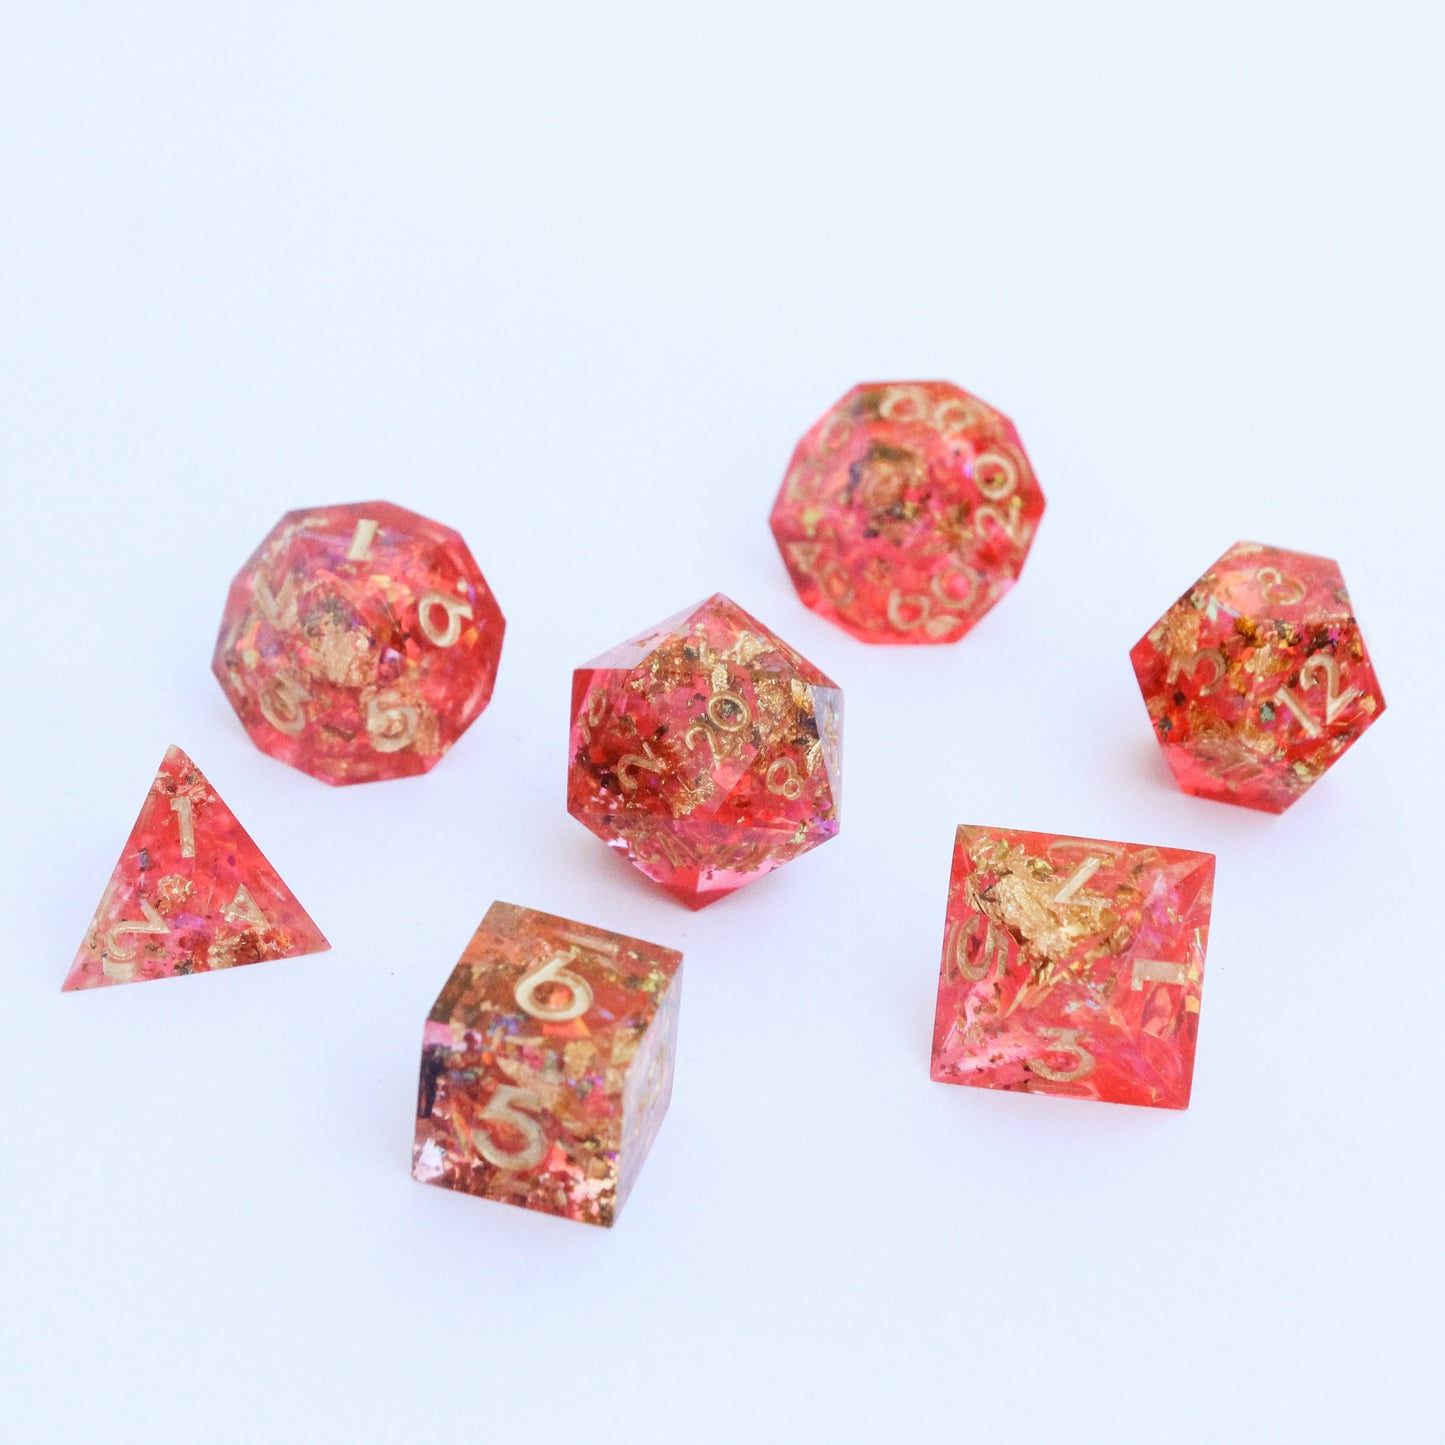 Sight of Savras in Pink - 7-piece Polyhedral Dice Set